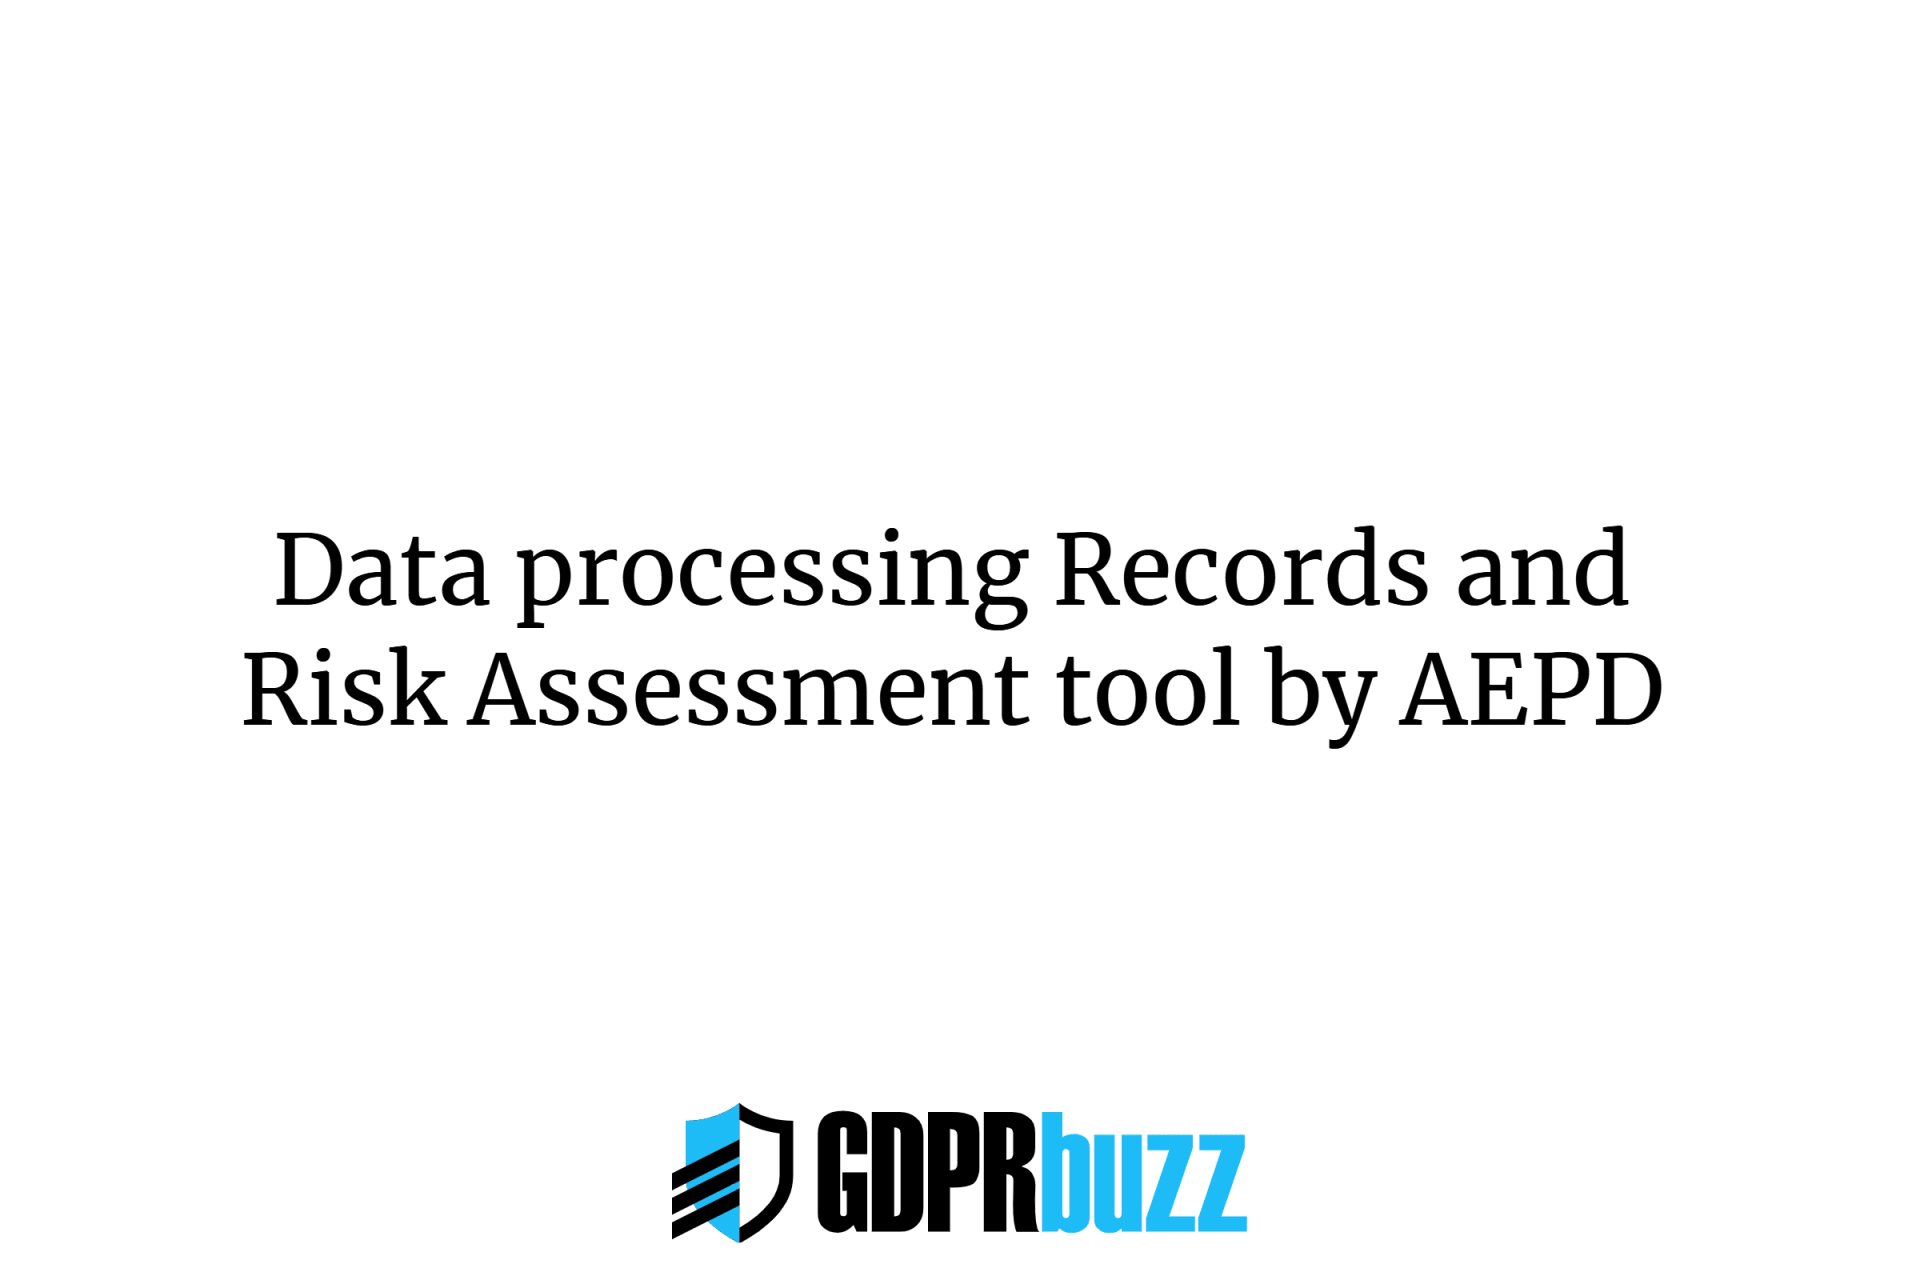 Data processing records and risk assessment